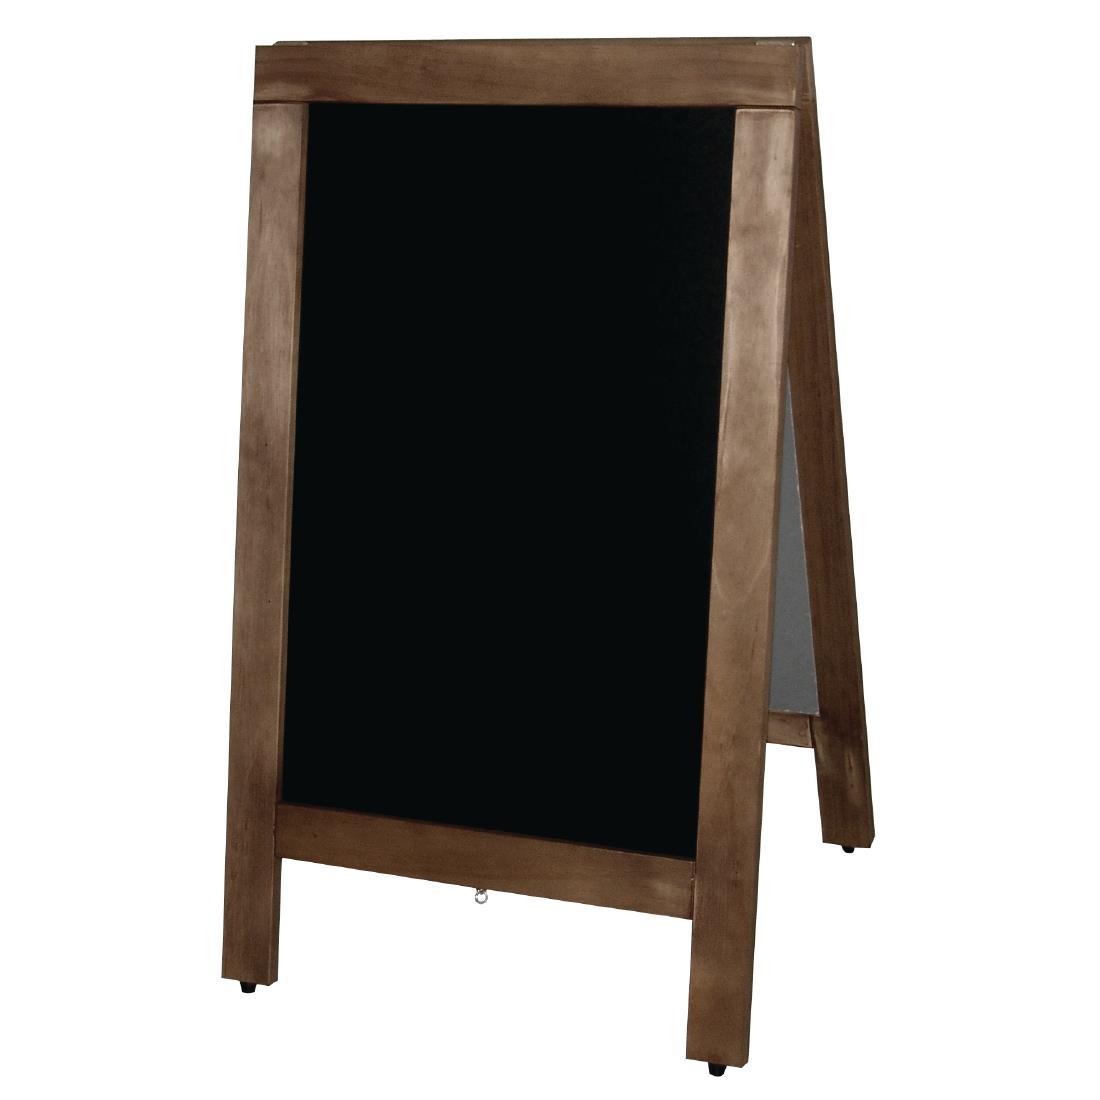 Olympia Pavement Board 850 x 500mm Wood Framed - GG108  - 1